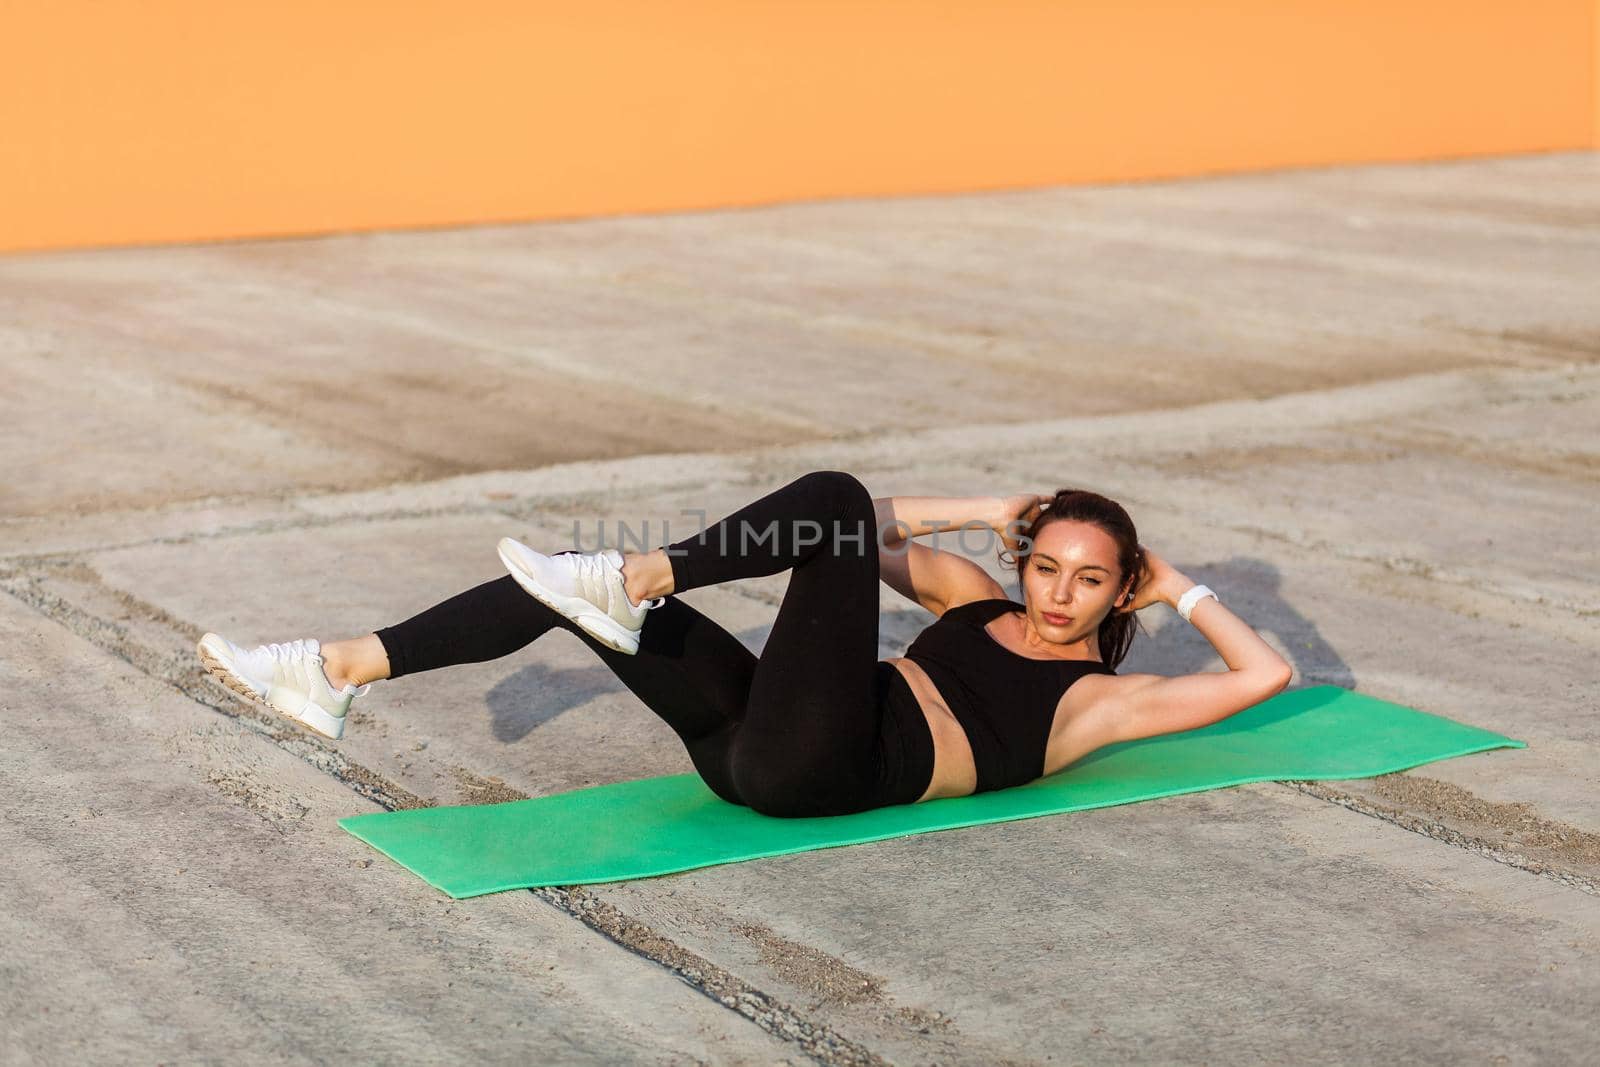 Fit sporty beautiful girl in tight sportswear, black pants and top, lying on mat doing sit ups, crunch exercise, training abdominal muscles. Health care and weight loss concept, sport activity outdoor